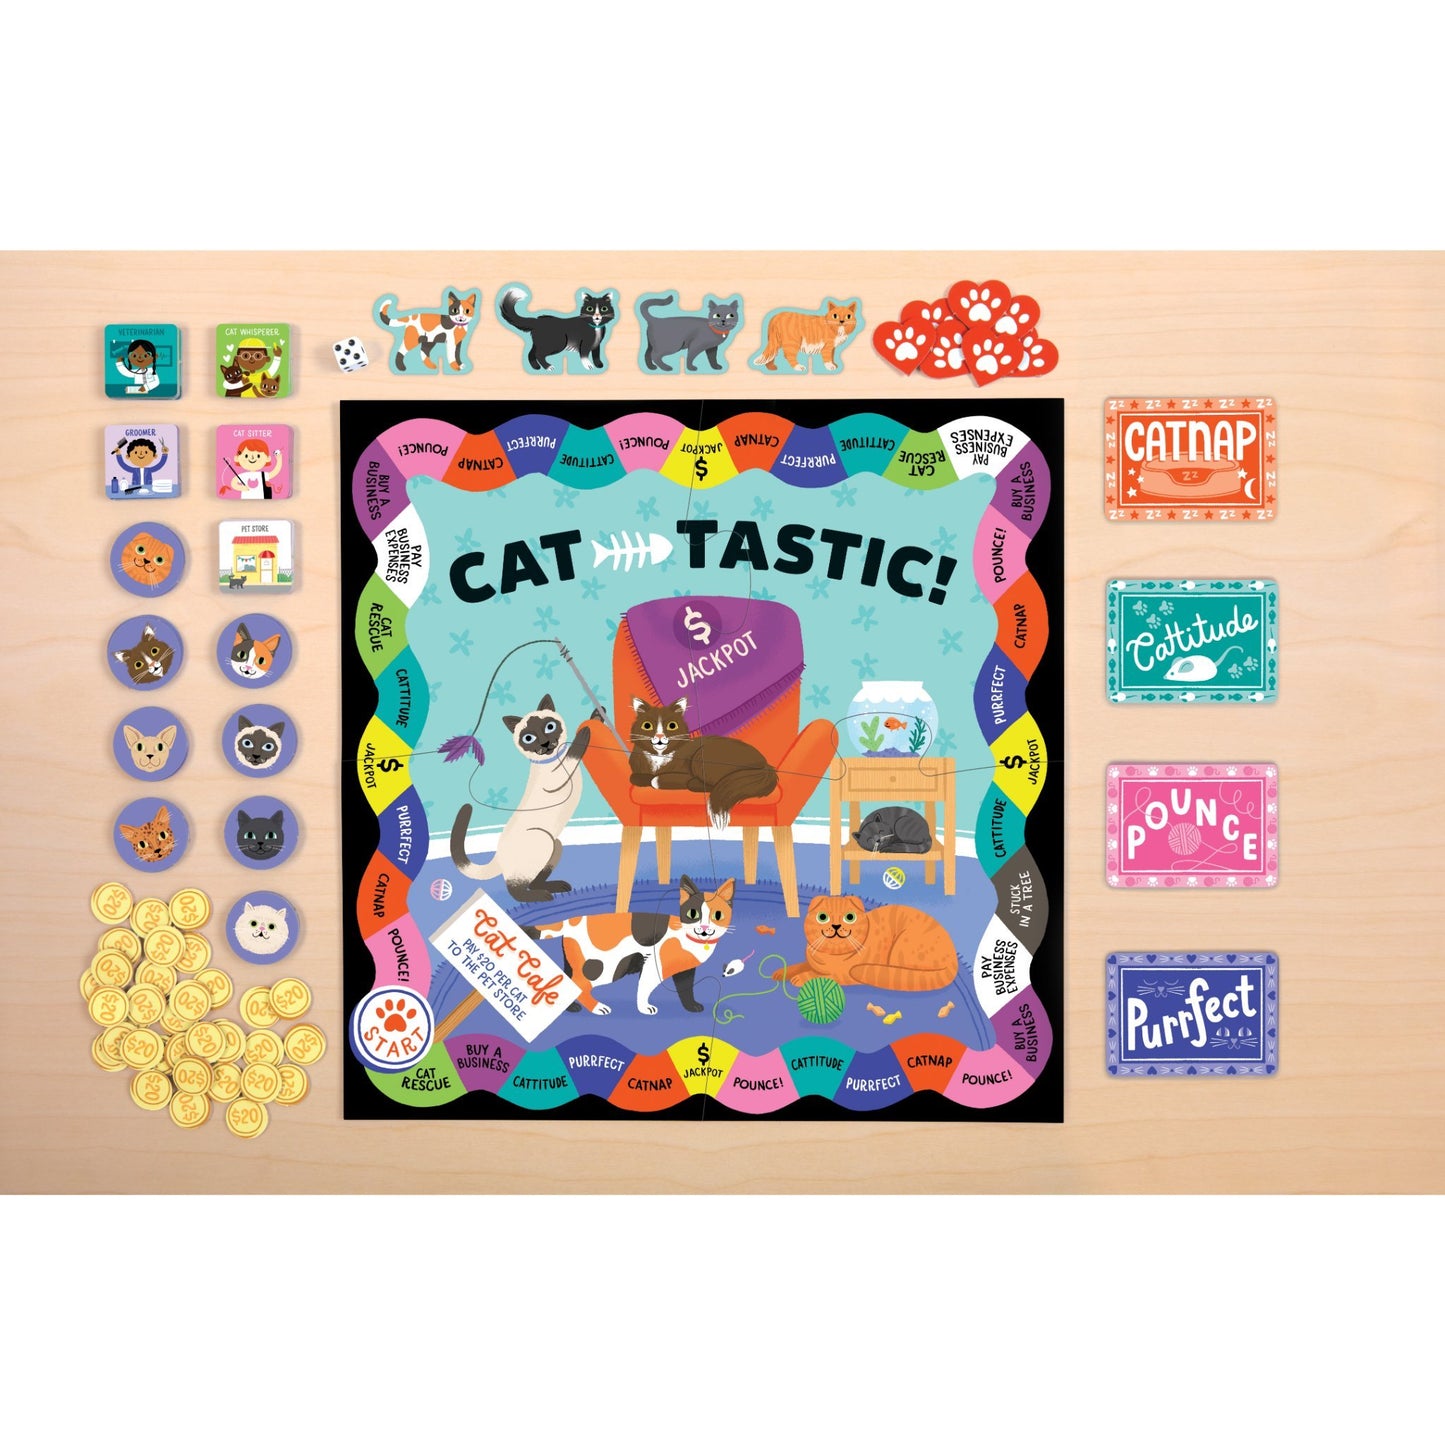 Cat-Tastic! Board Game - Tiny Tiger Gift Shop